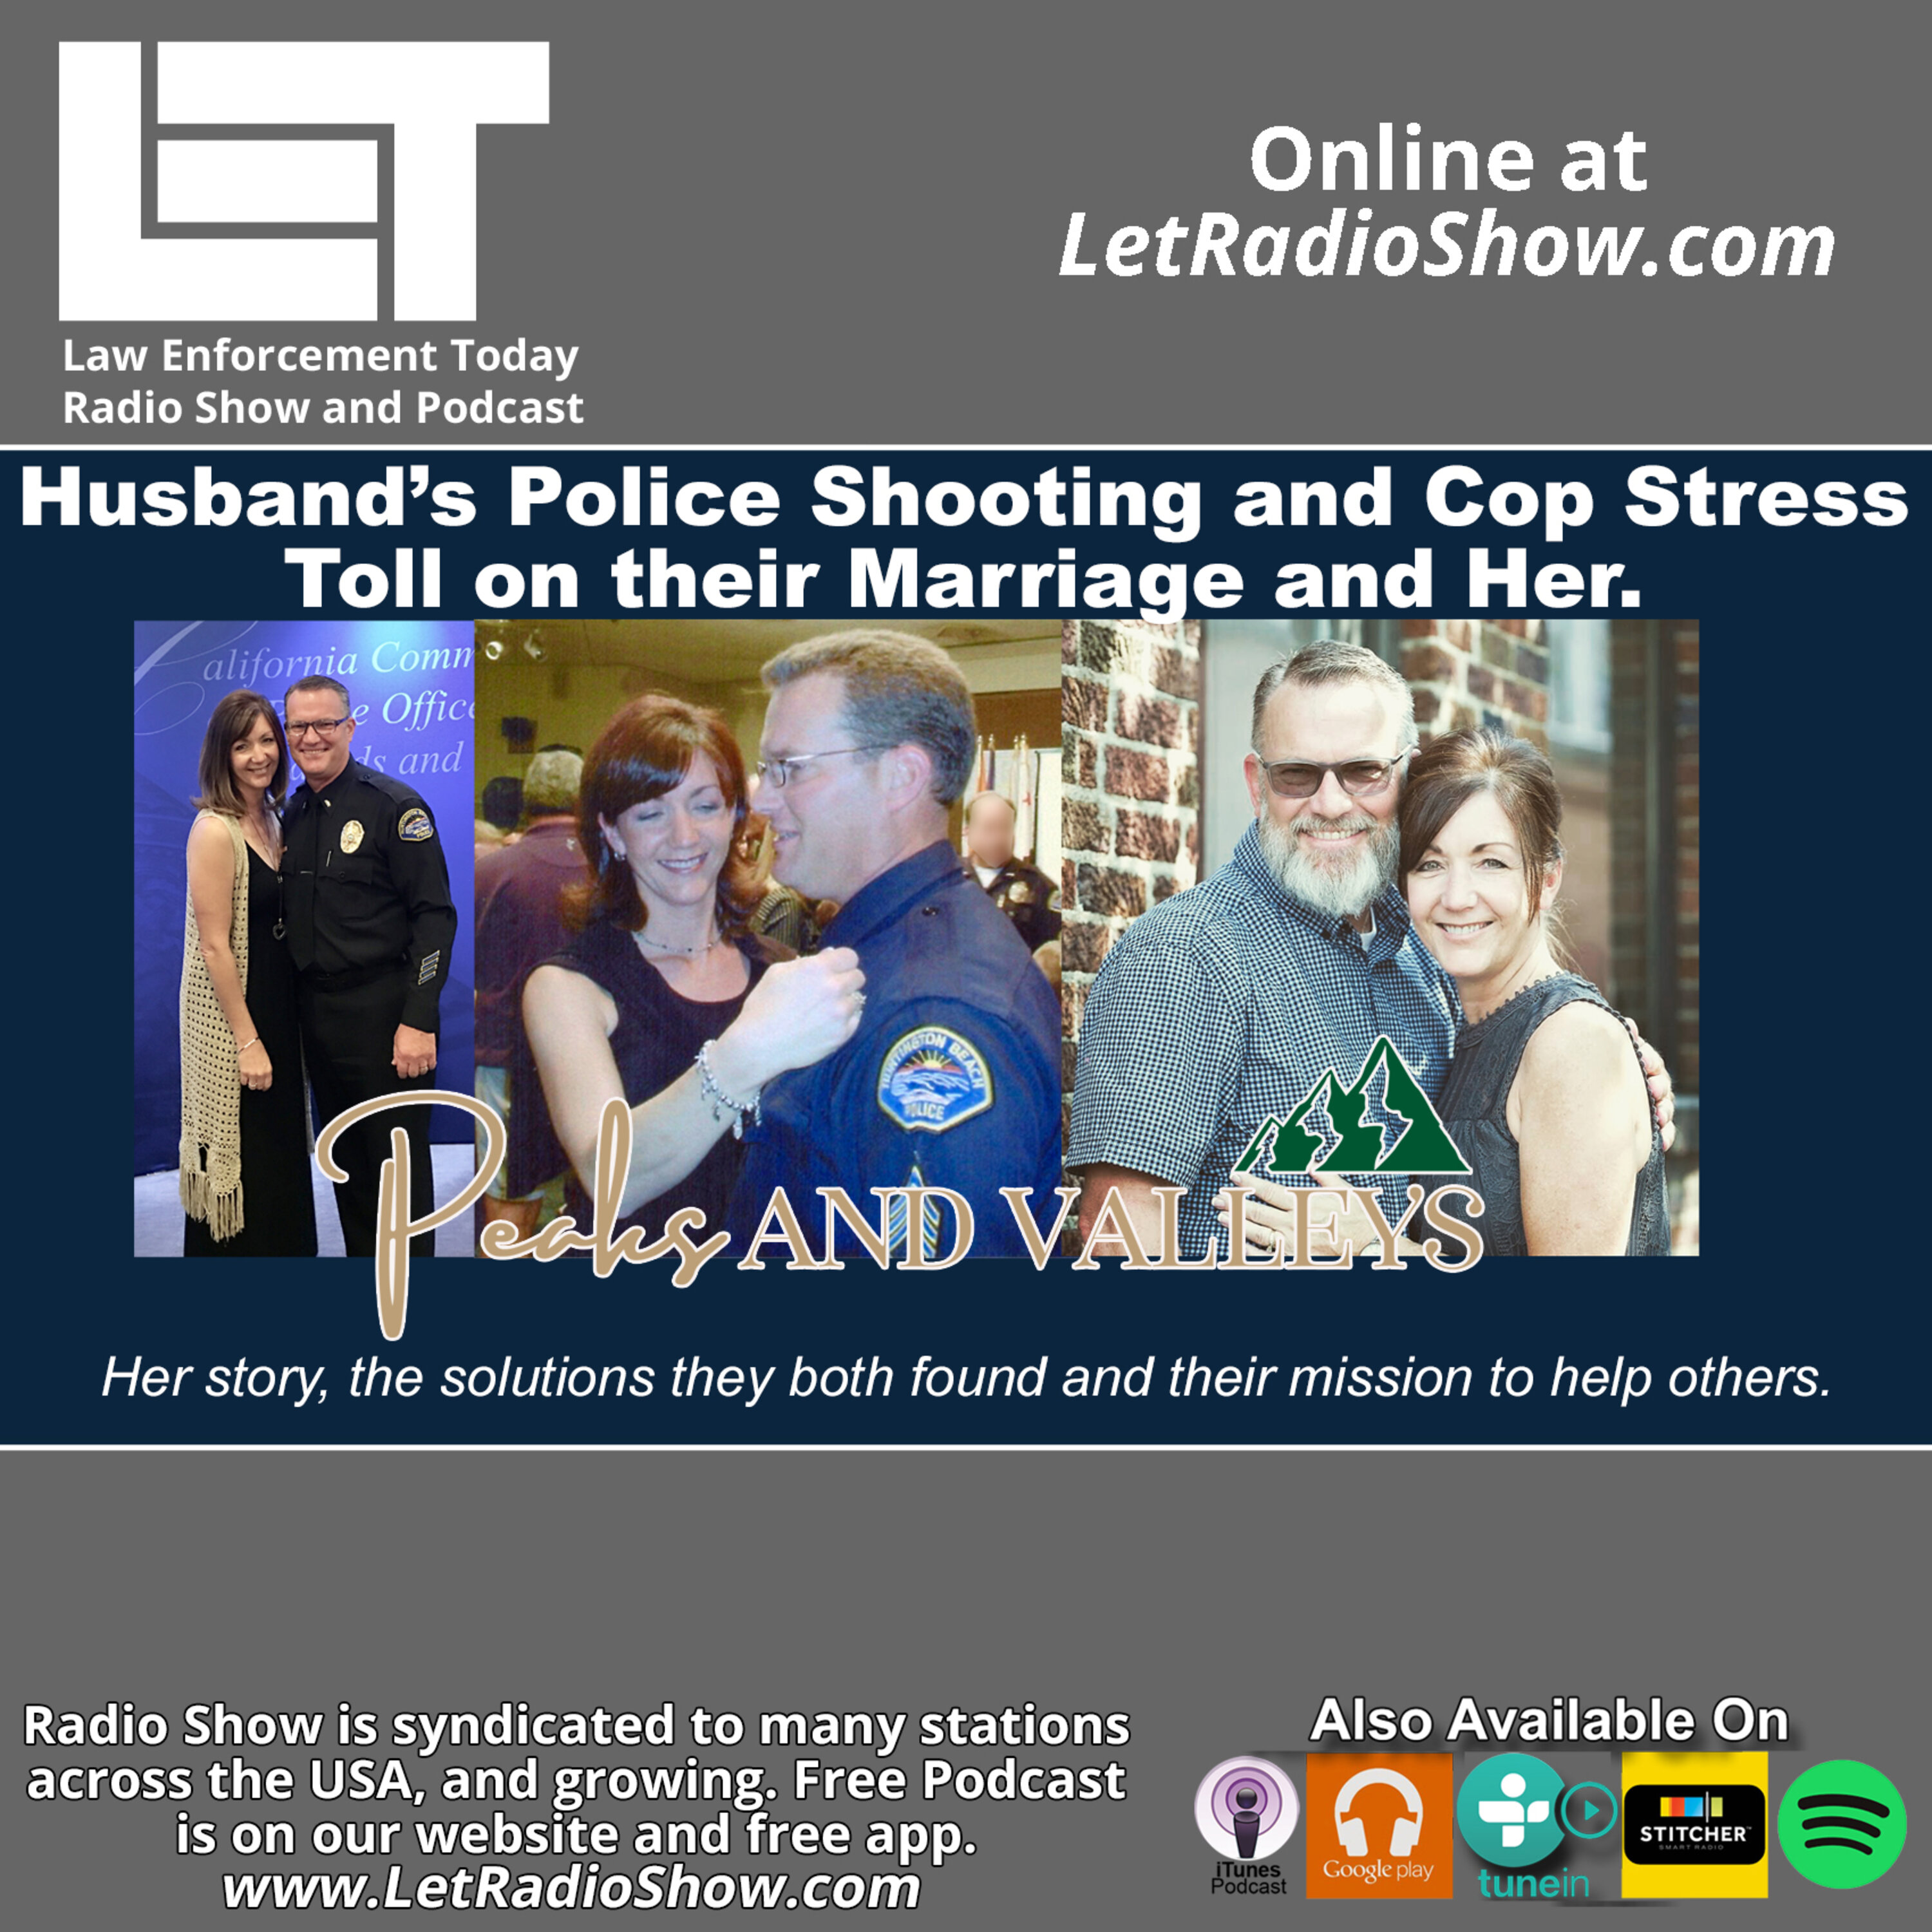 Police Shooting and Cop Stress, Toll on their Marriage and Her.